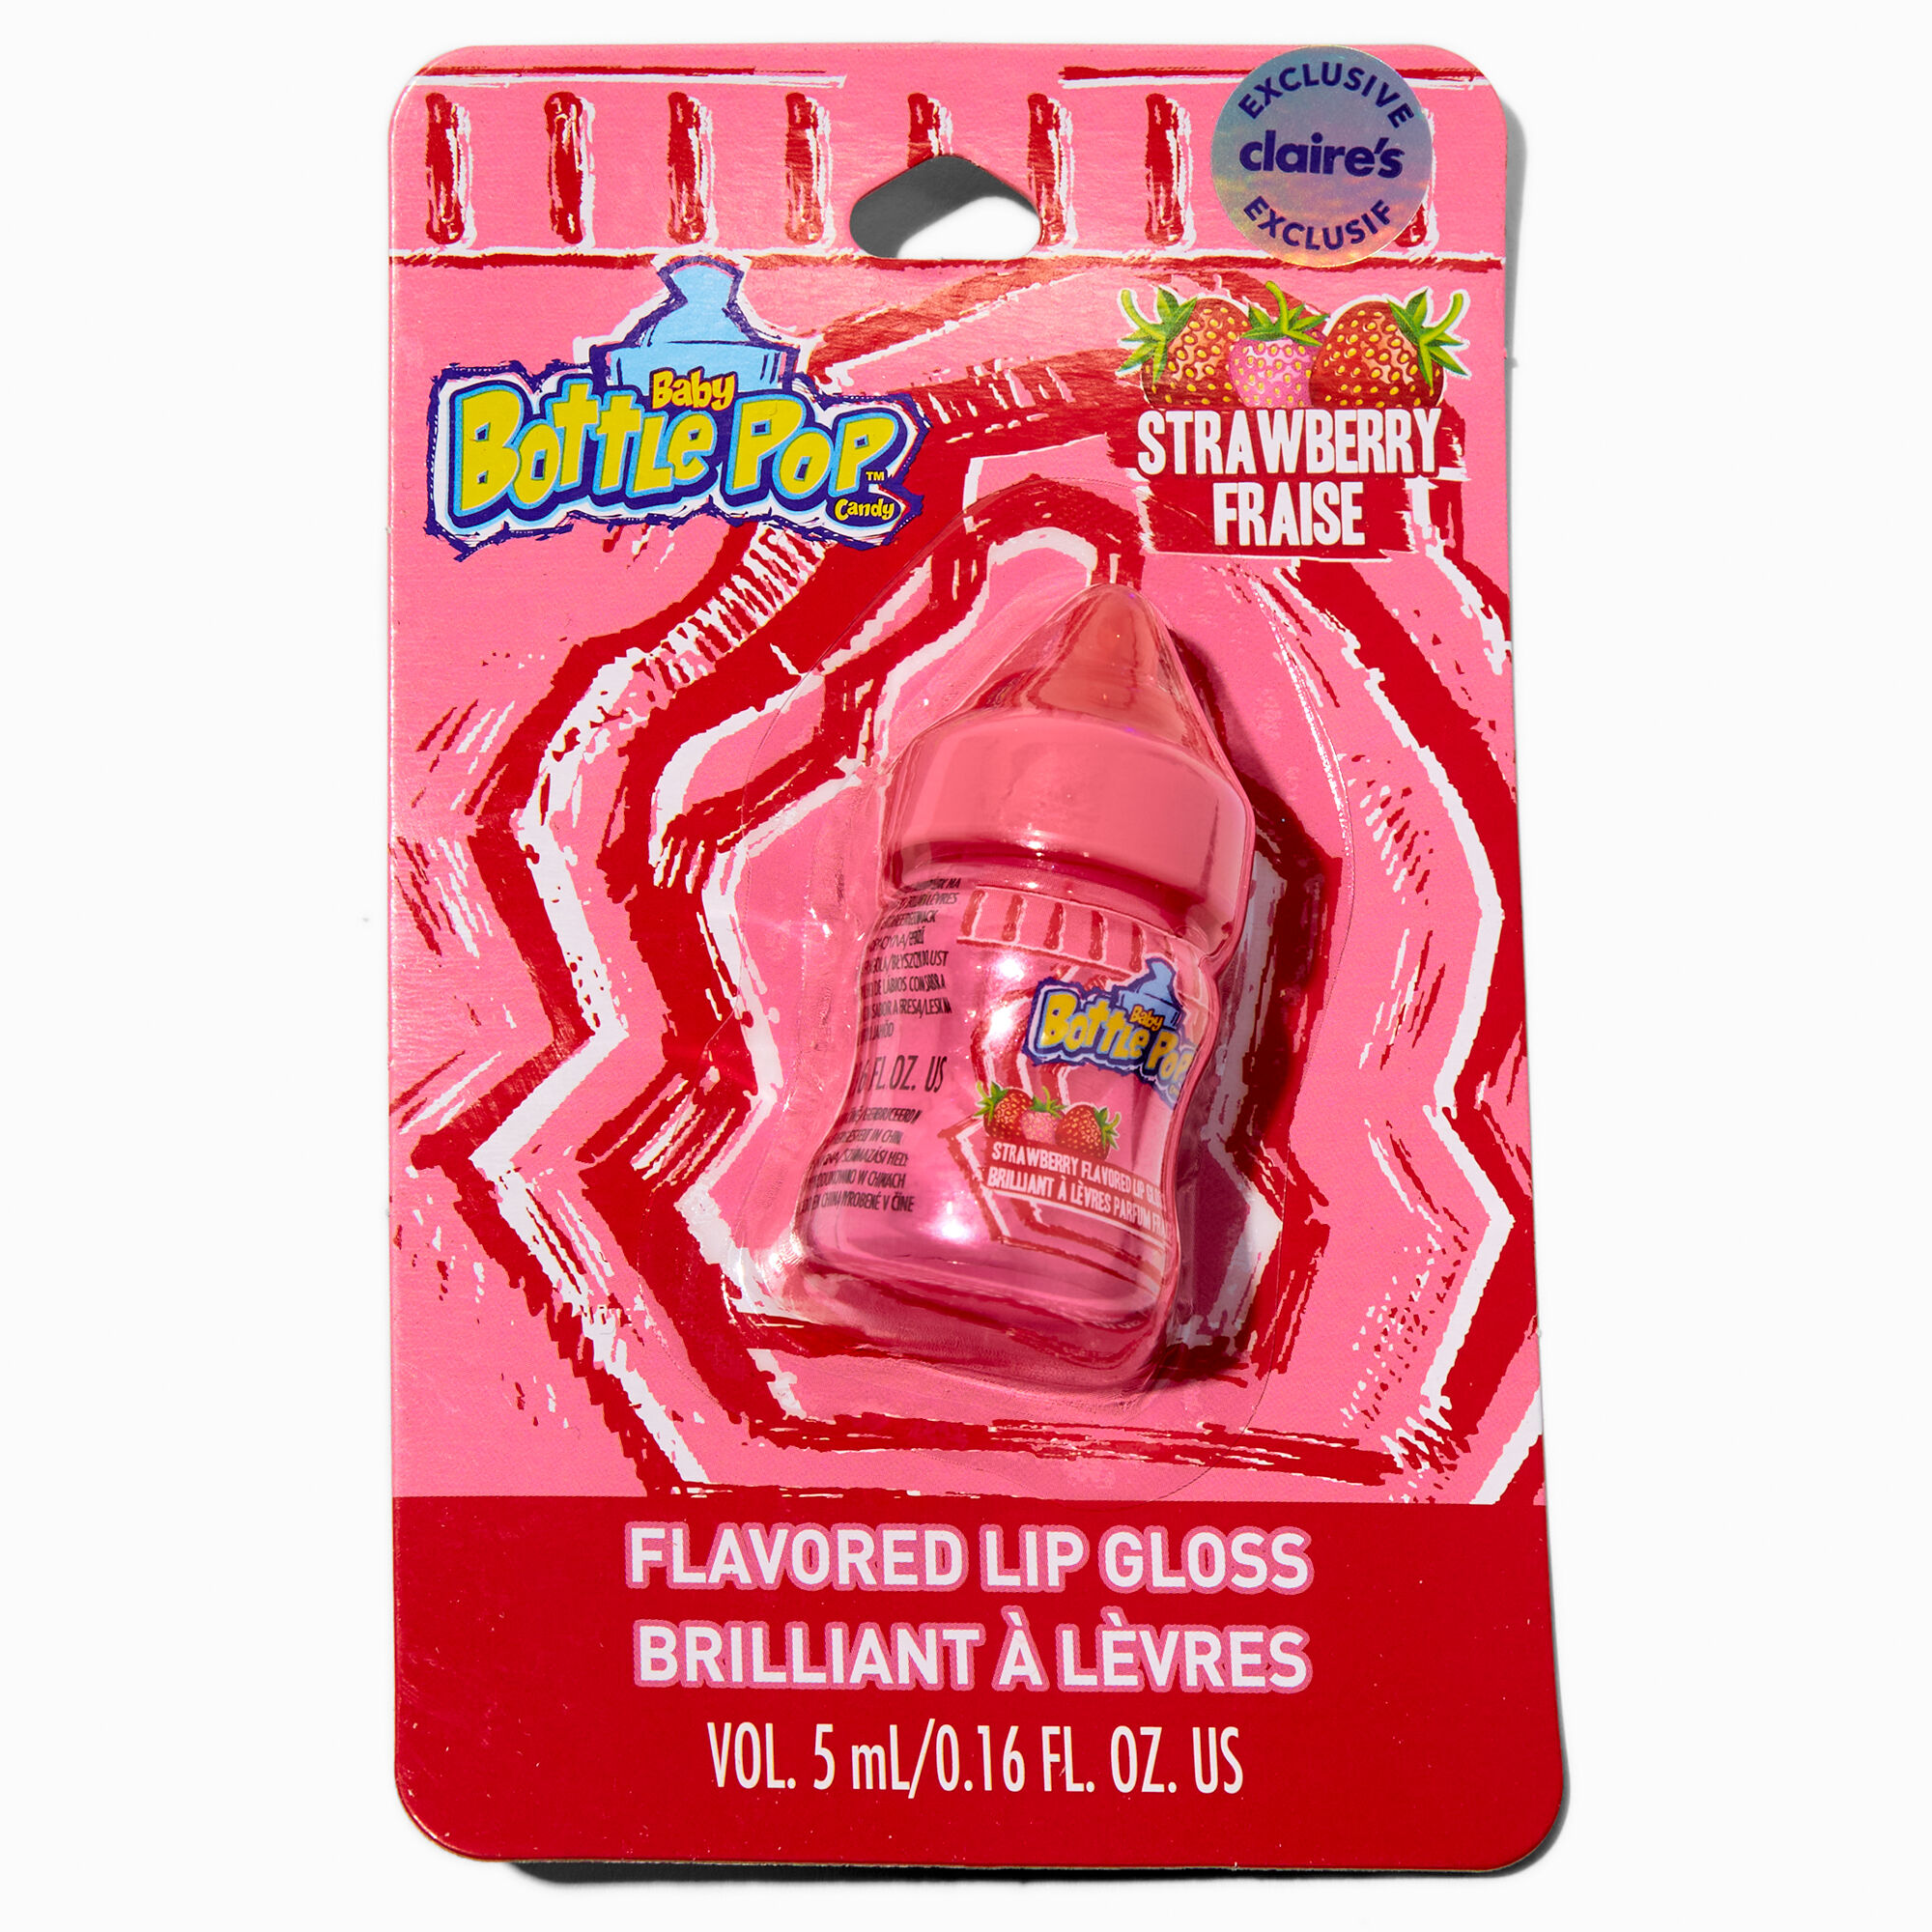 View Baby Bottle Pop Candy Claires Exclusive Flavored Lip Gloss information